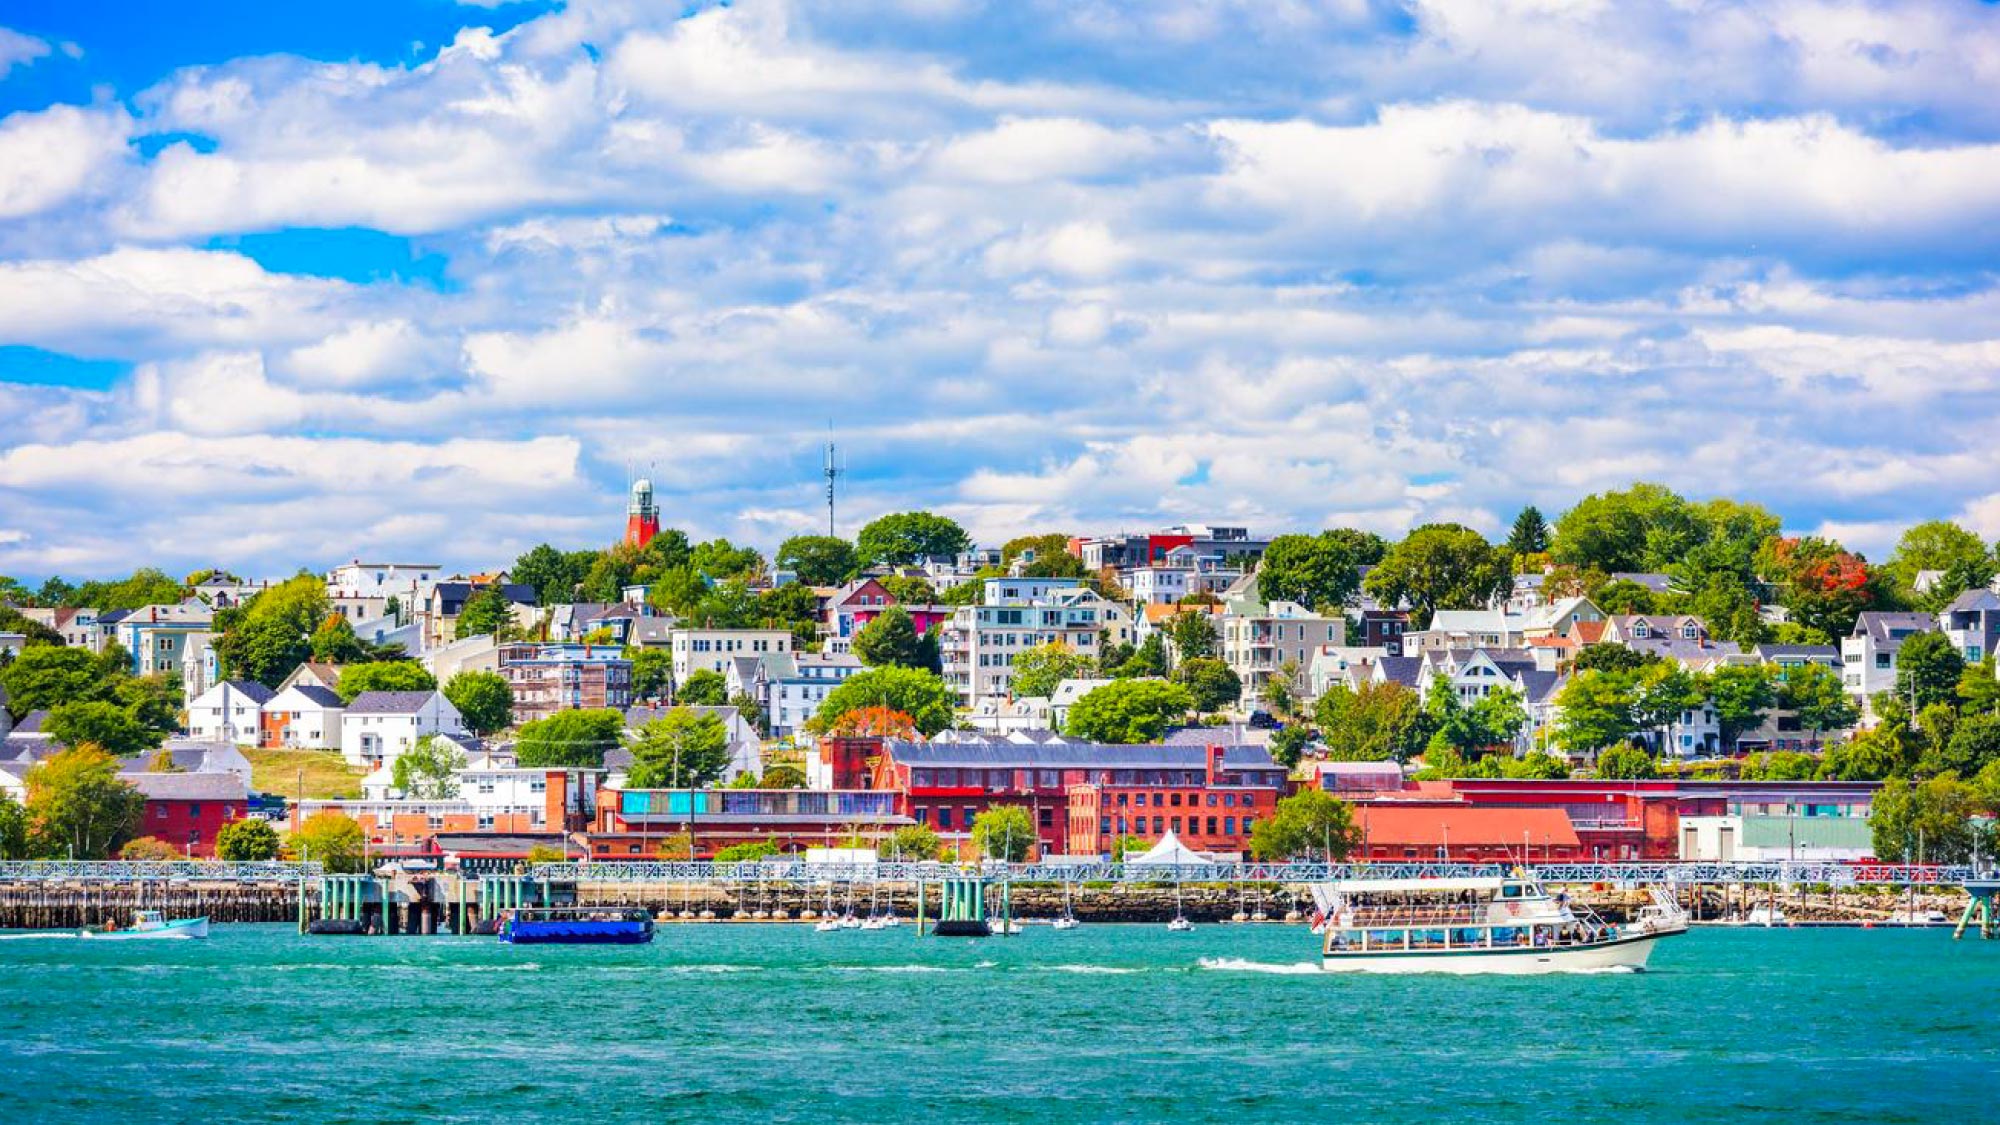 A scenic view of Portland, Maine, showcasing its charming waterfront, historic buildings, and vibrant atmosphere. Portland is a highlight of a journey to Australia, visiting 21 countries, perfect for travelers who fly and own their own airplanes.